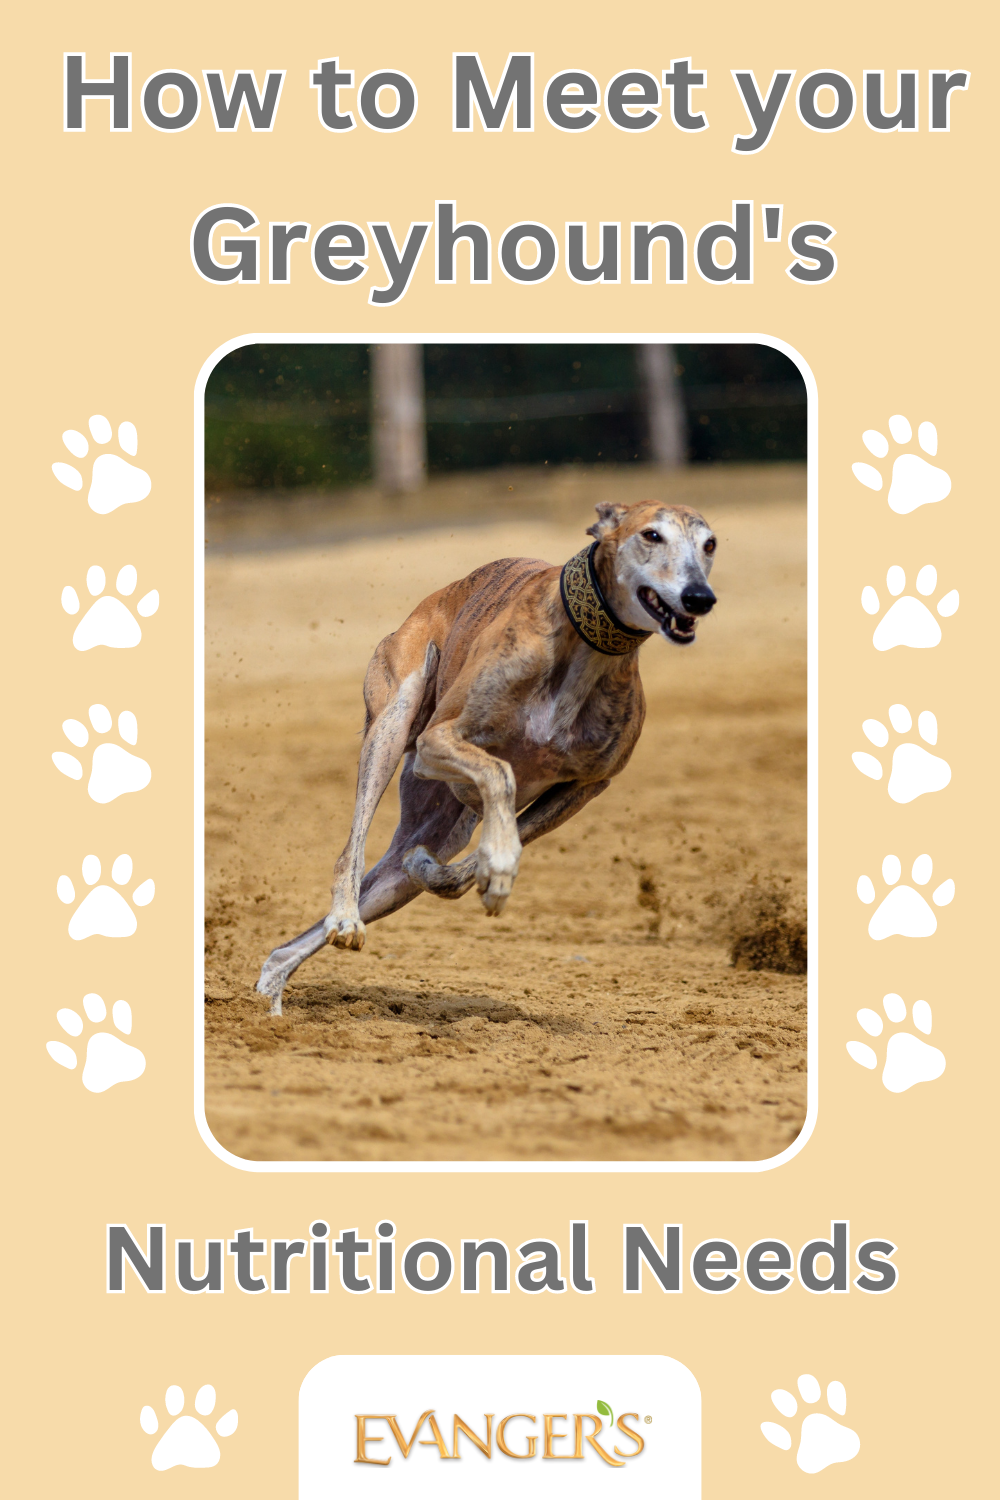 How to Meet your Greyhound's Nutritional Needs